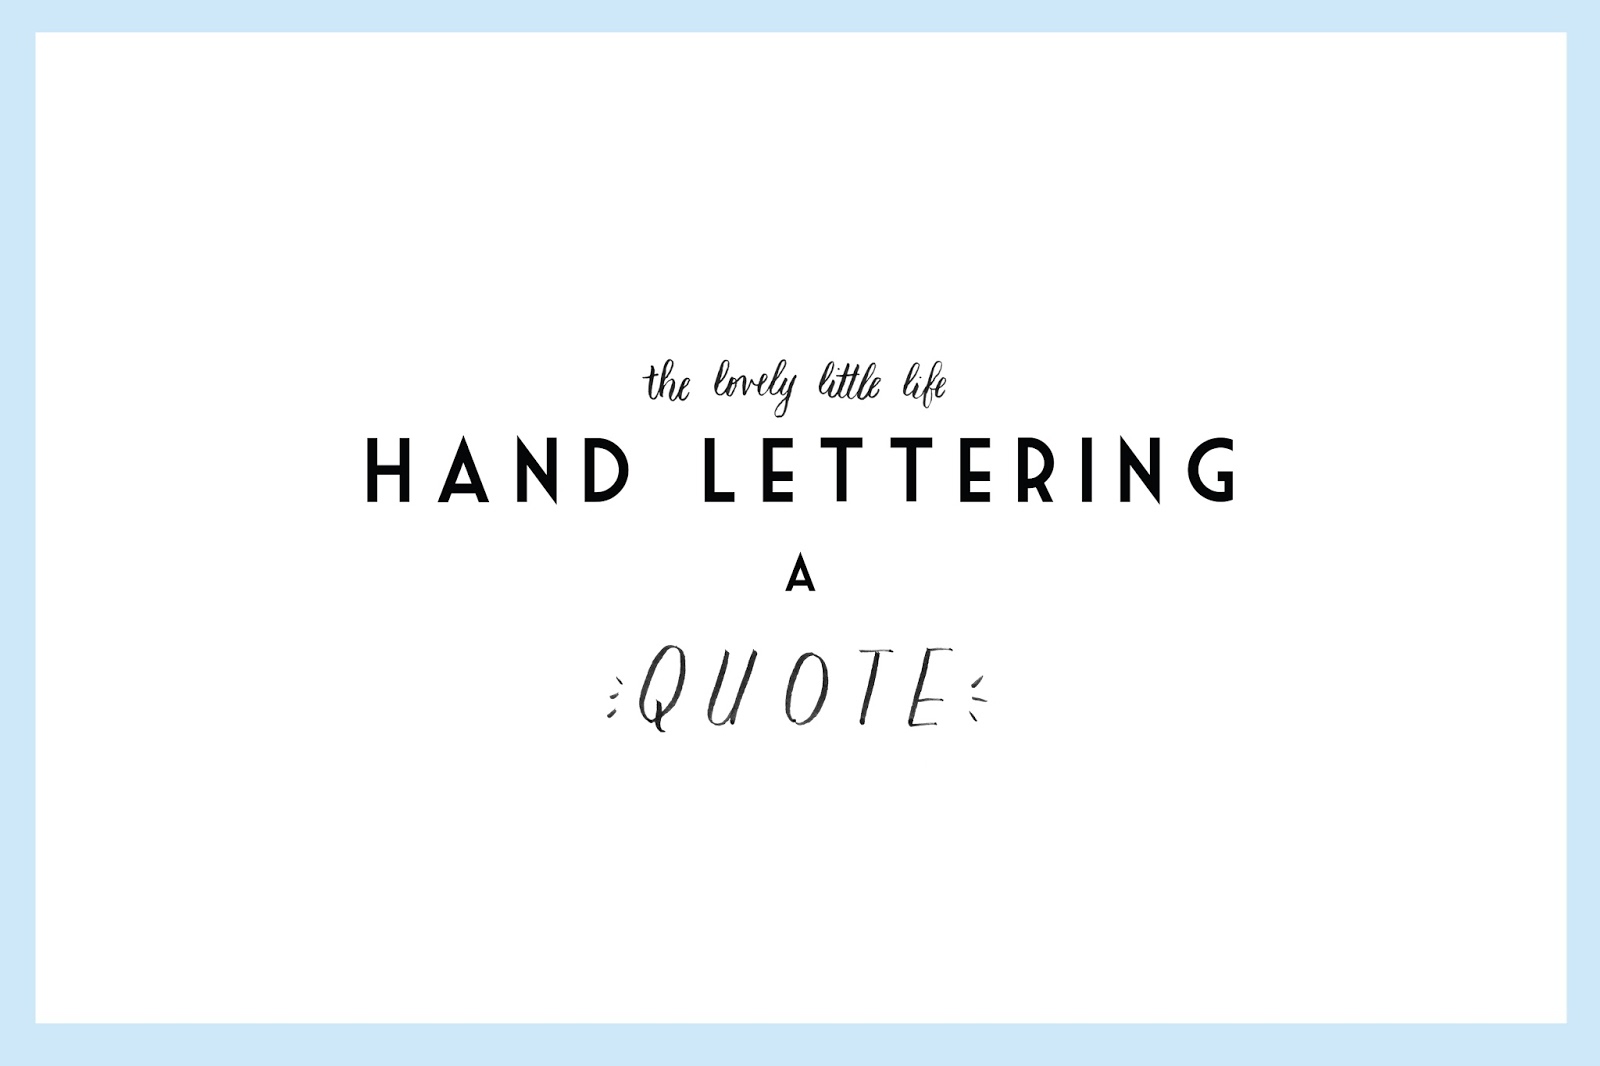 How to Hand Letter: Quotes